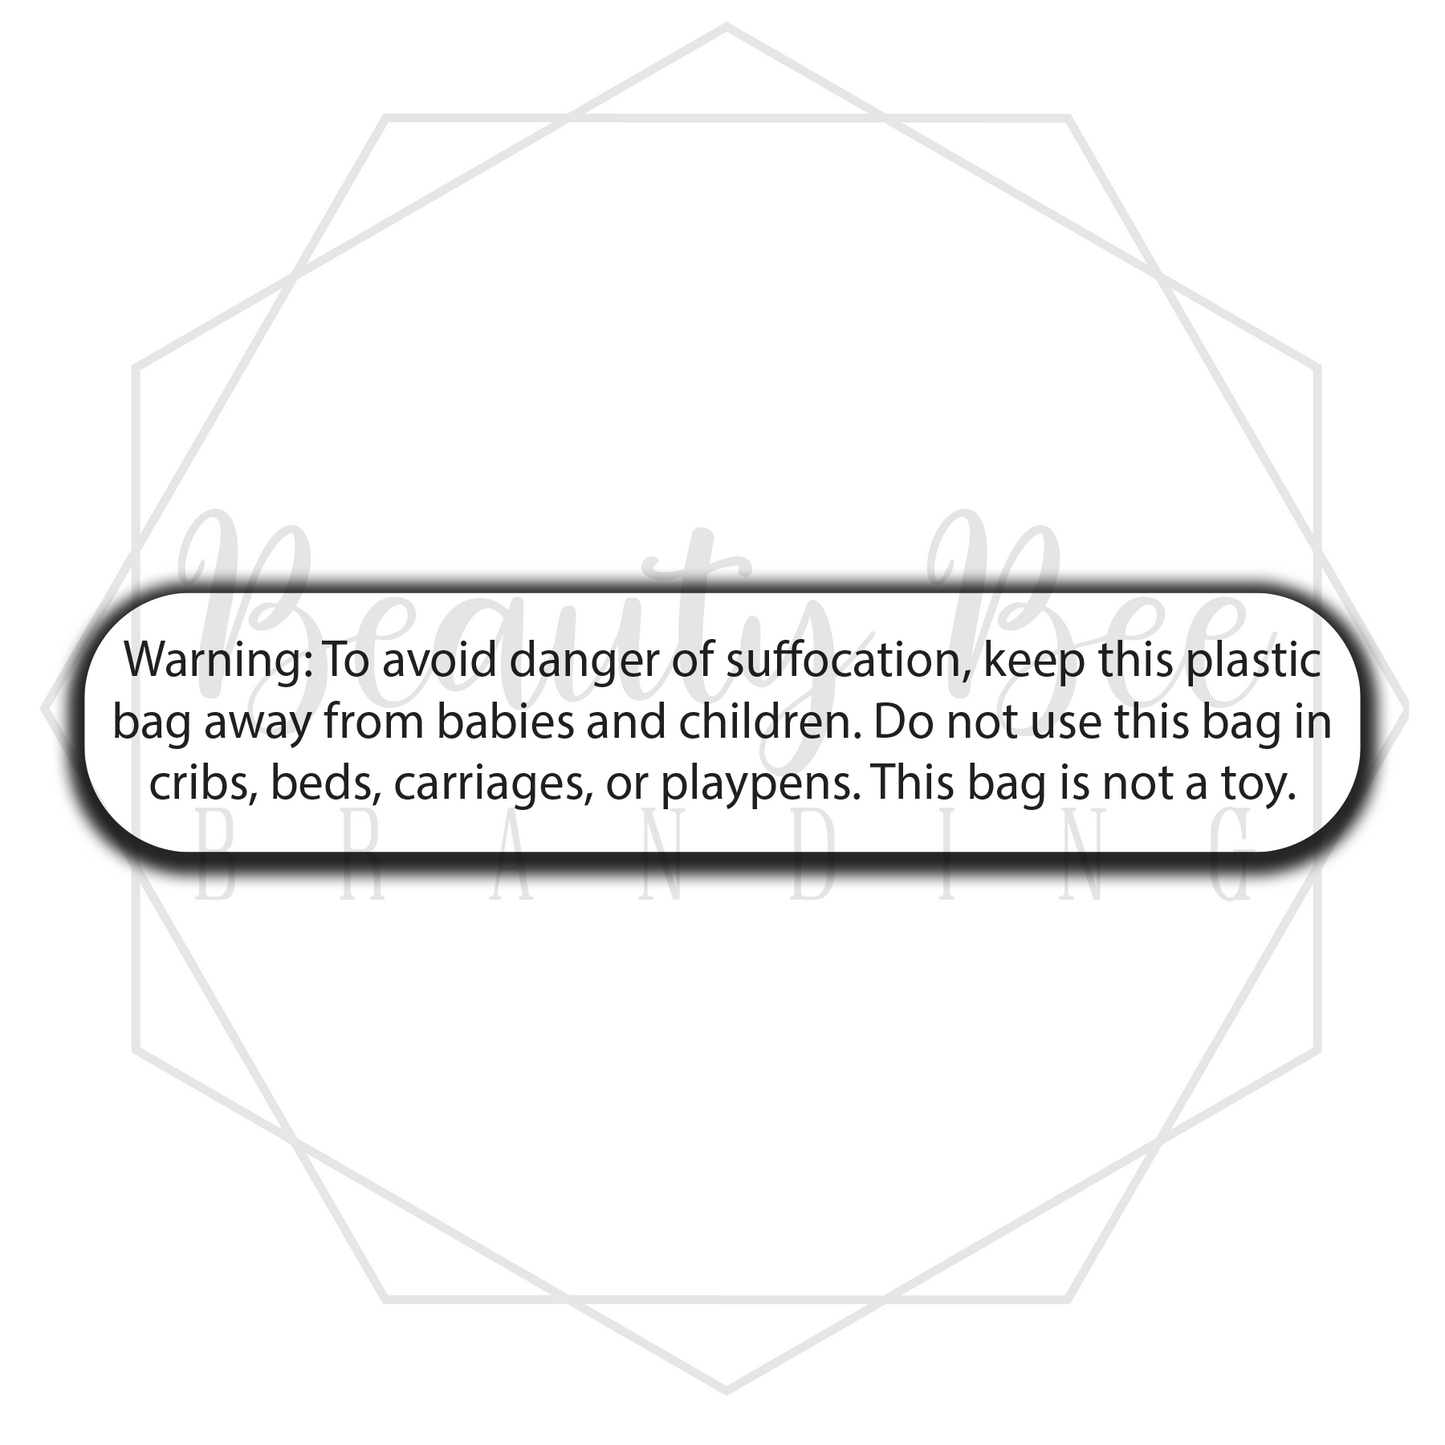 Suffocation Warning For Bags Sticker Sheet